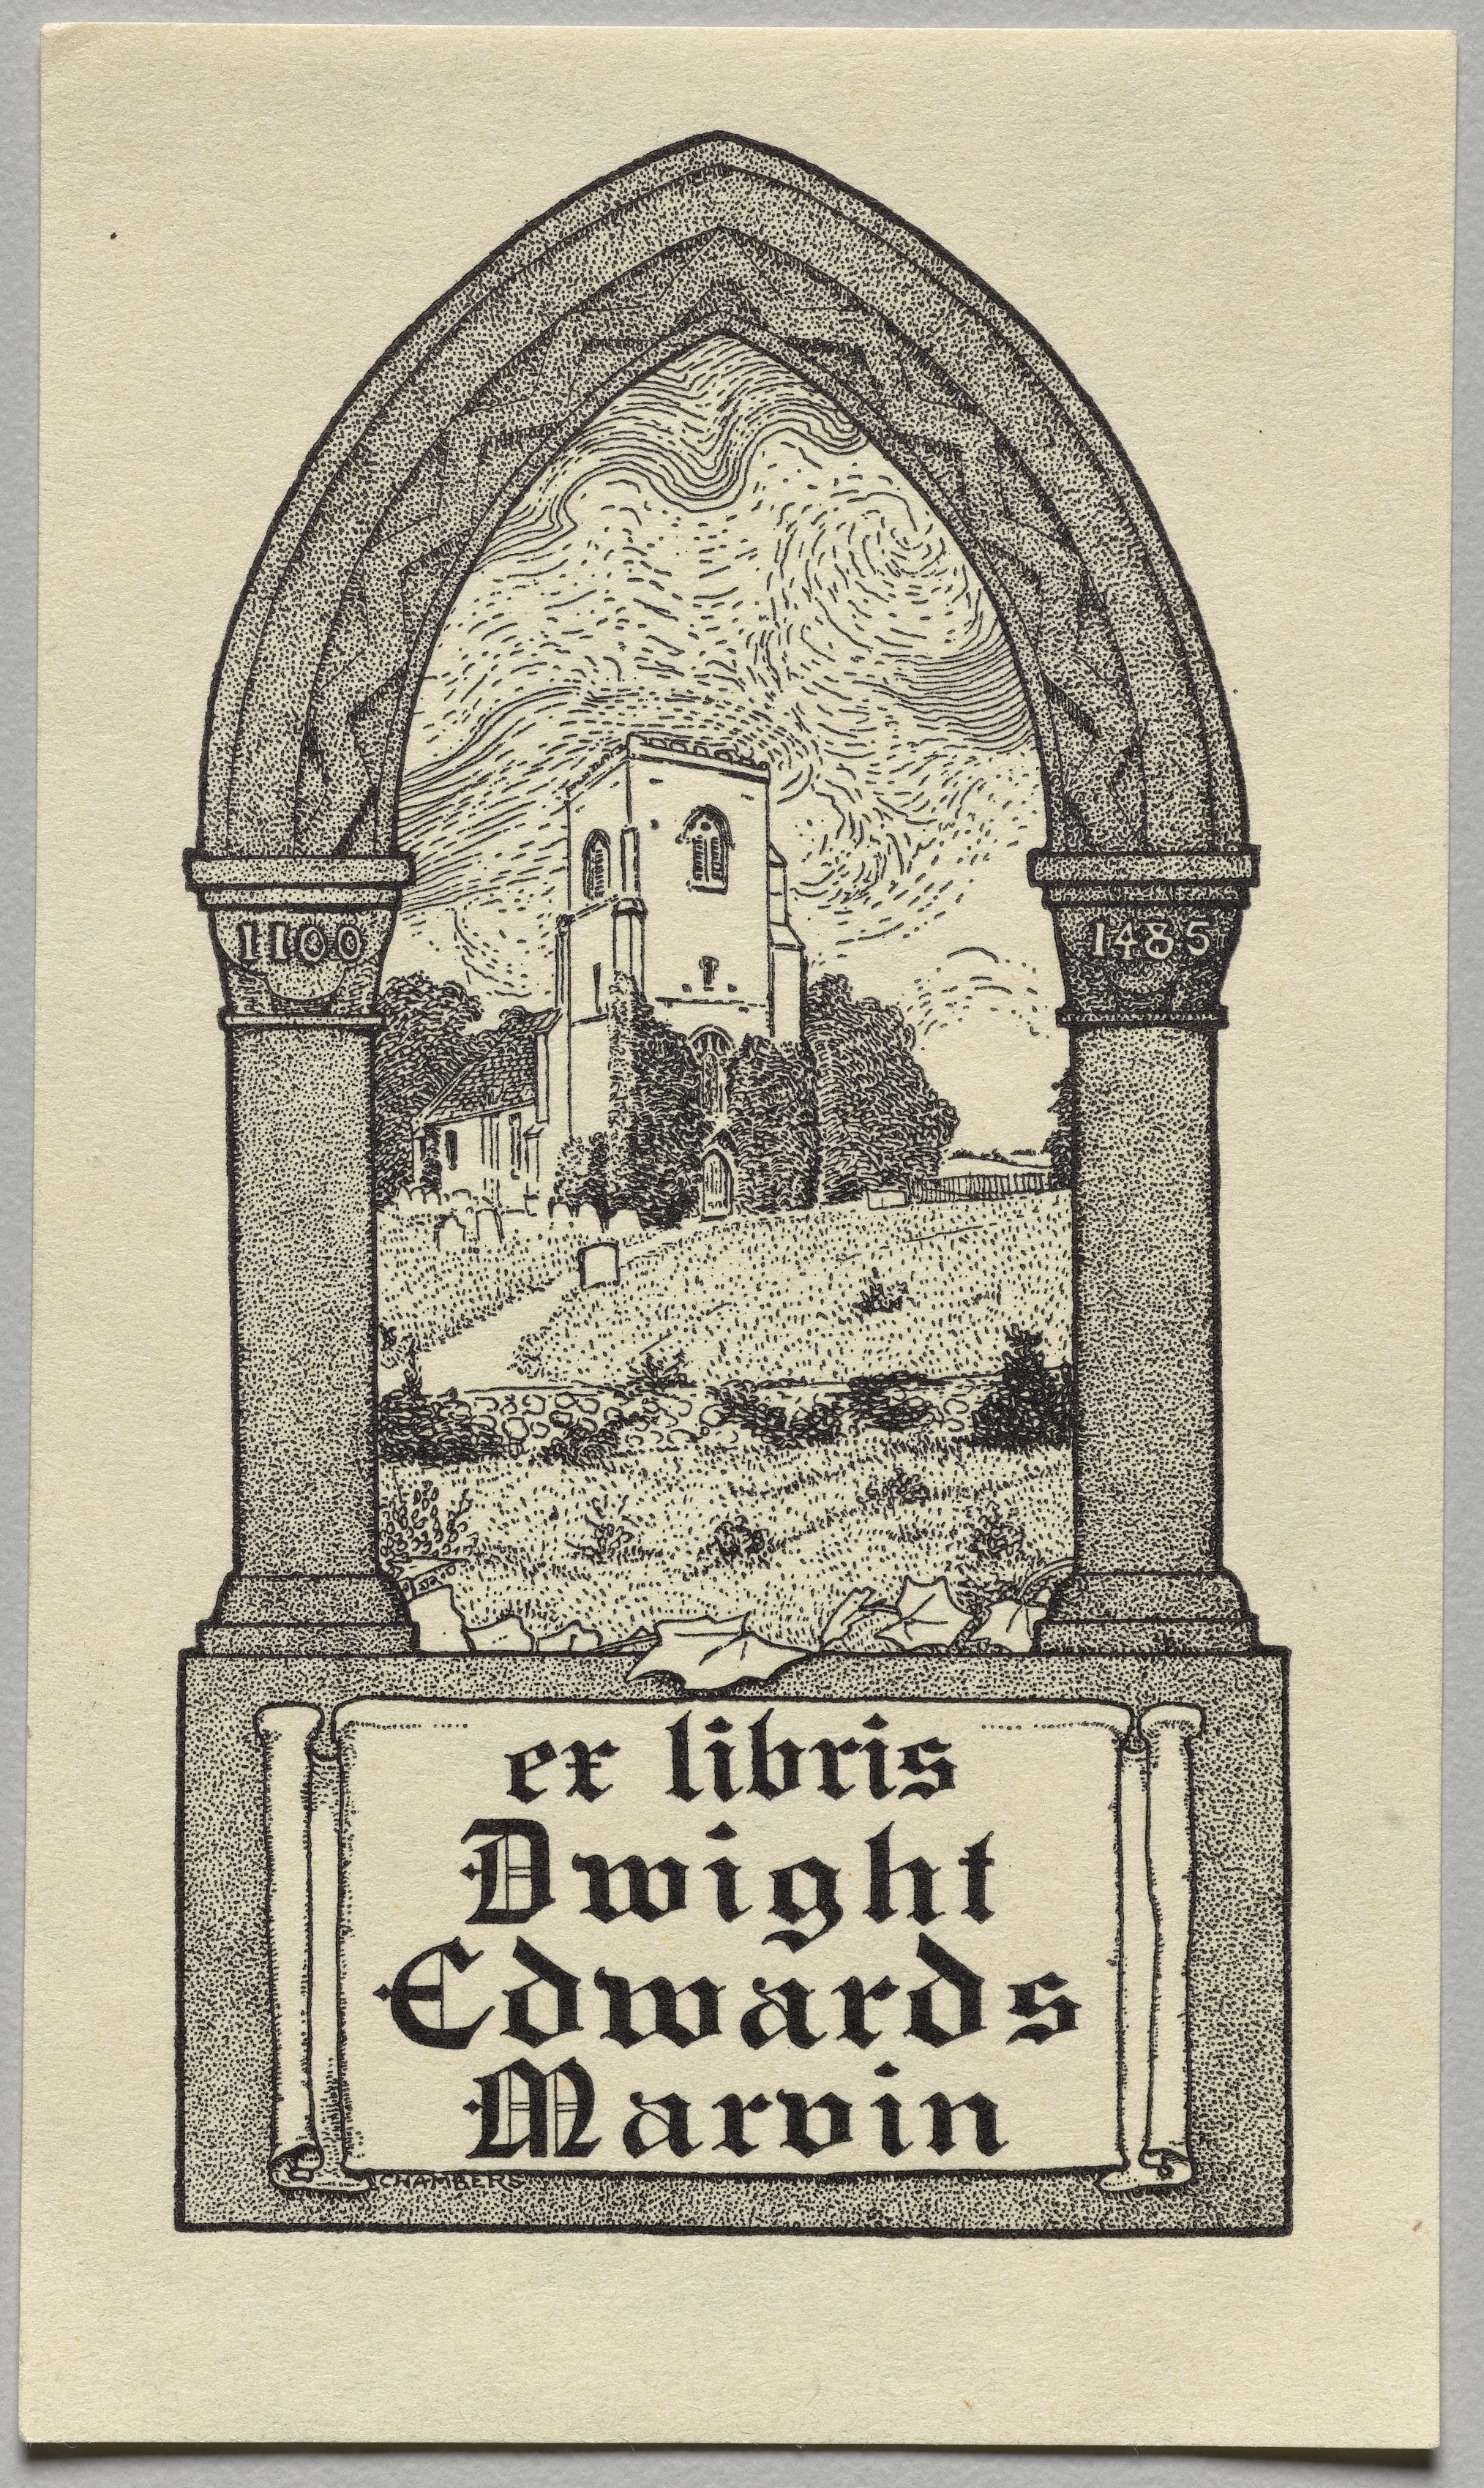 Bookplate: Dwight Edwards Marvin